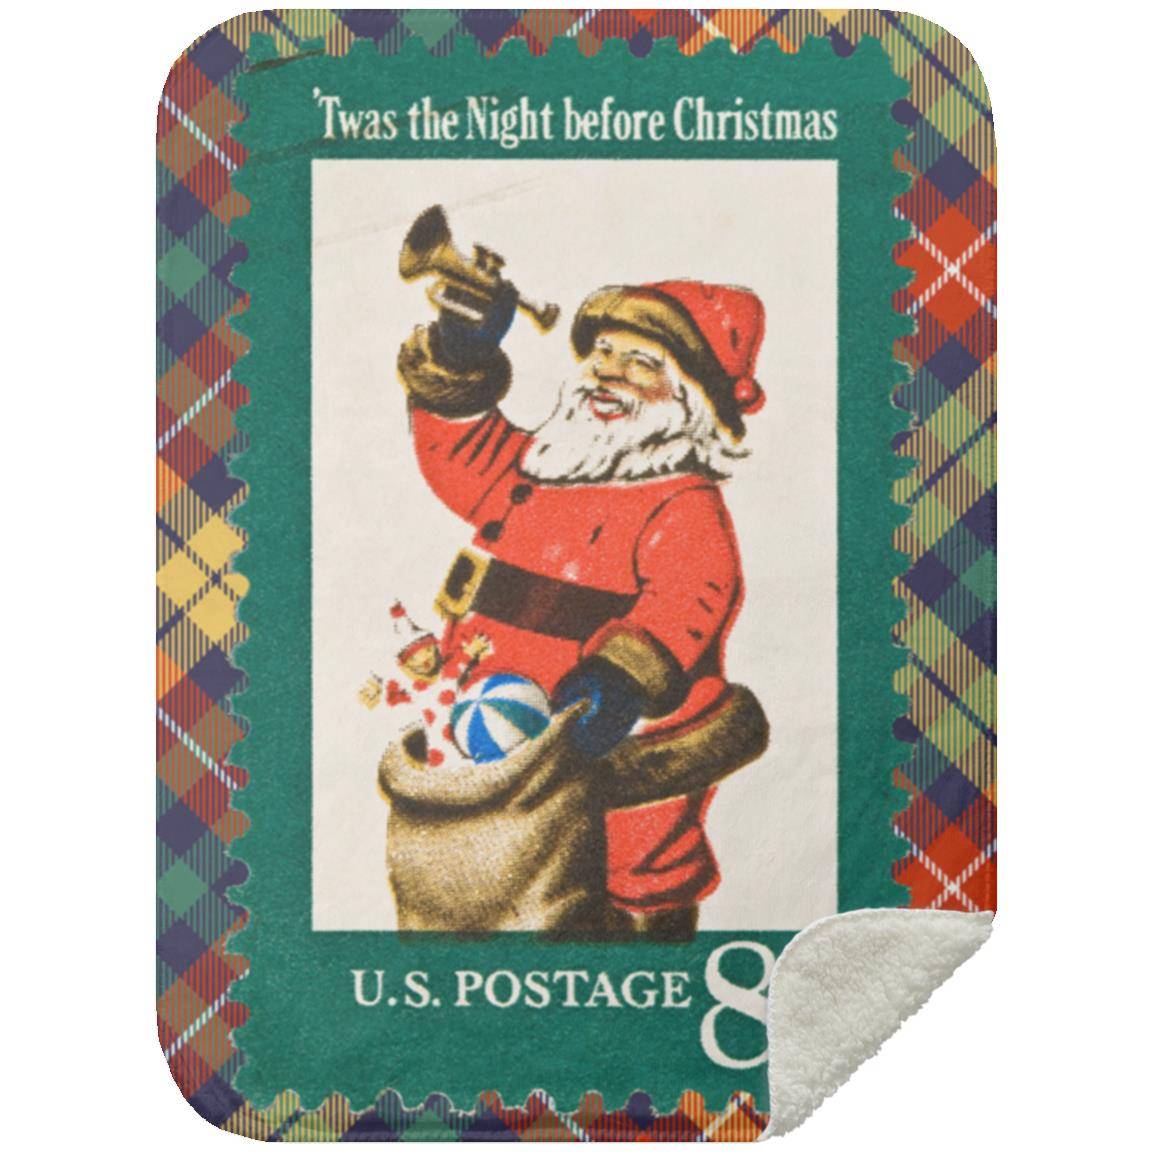 Vintage Christmas Stamp (circa 1972) Blanket on Multi-color Plaid Background. Comes in 30x40 inch (Baby Blanket), 50x60 inch (Throw) or 60x80 inch (Queen). Premium Silky Smooth front; Premium Fluffy Sherpa back side; Thickness: 1 cm Full color all over print; Prints edge to edge on one side. Machine wash separately in cold water; Tumble dry on low heat. Do not iron or press with heat; Do not dry clean. Decoration Type: Sublimation; Product Measurement Tolerance: +/- 1 inch